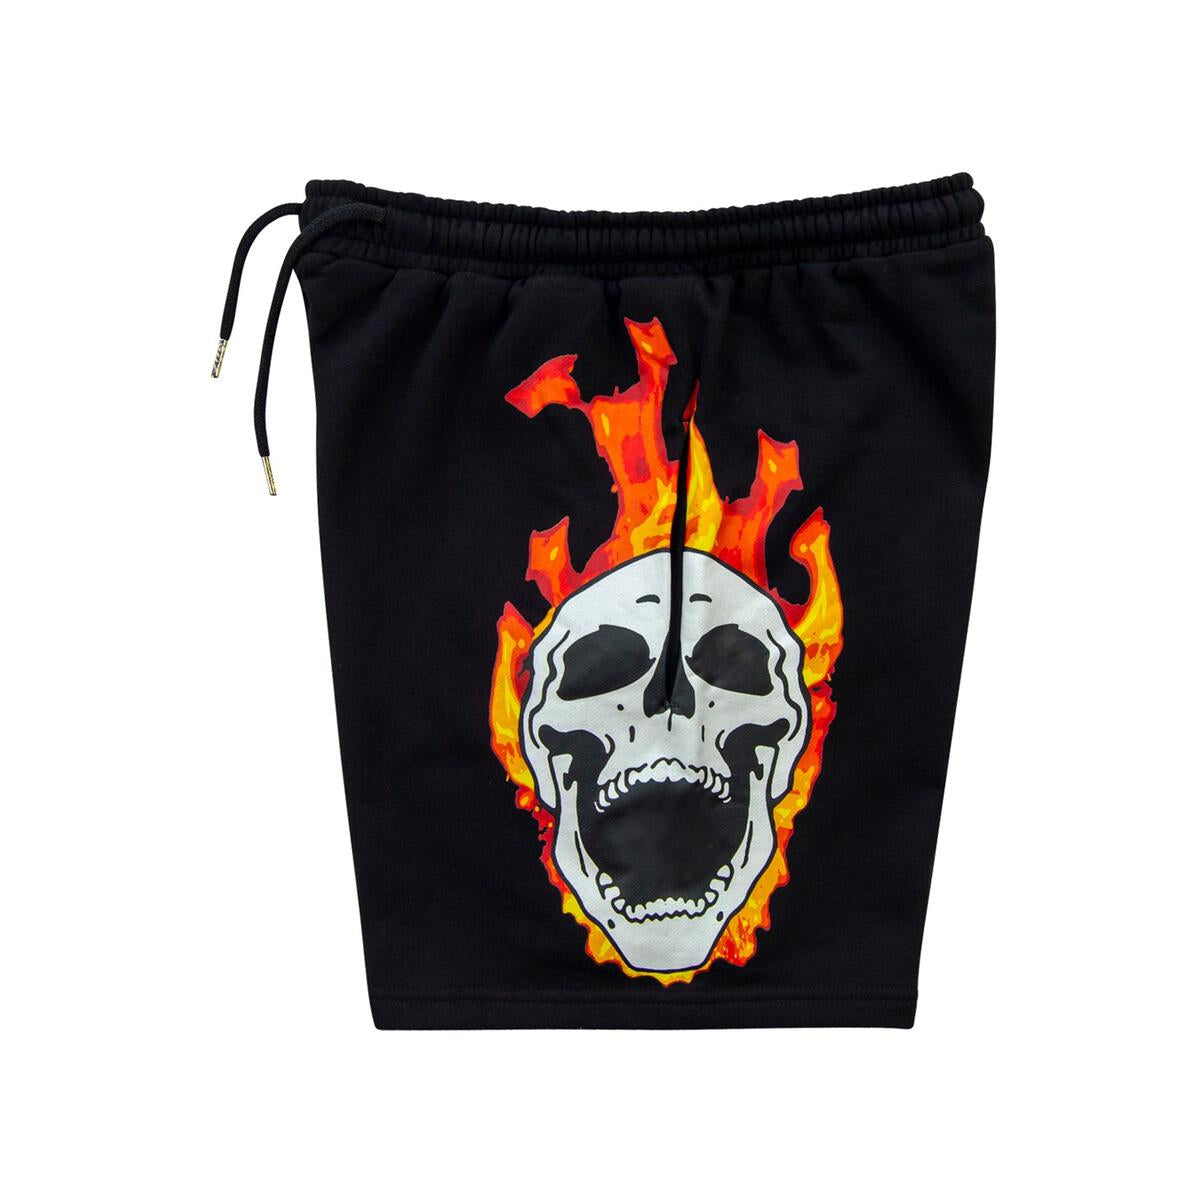 Gifts Of Fortune Flaming Skull Sweatshirts - Gifts of Fortune